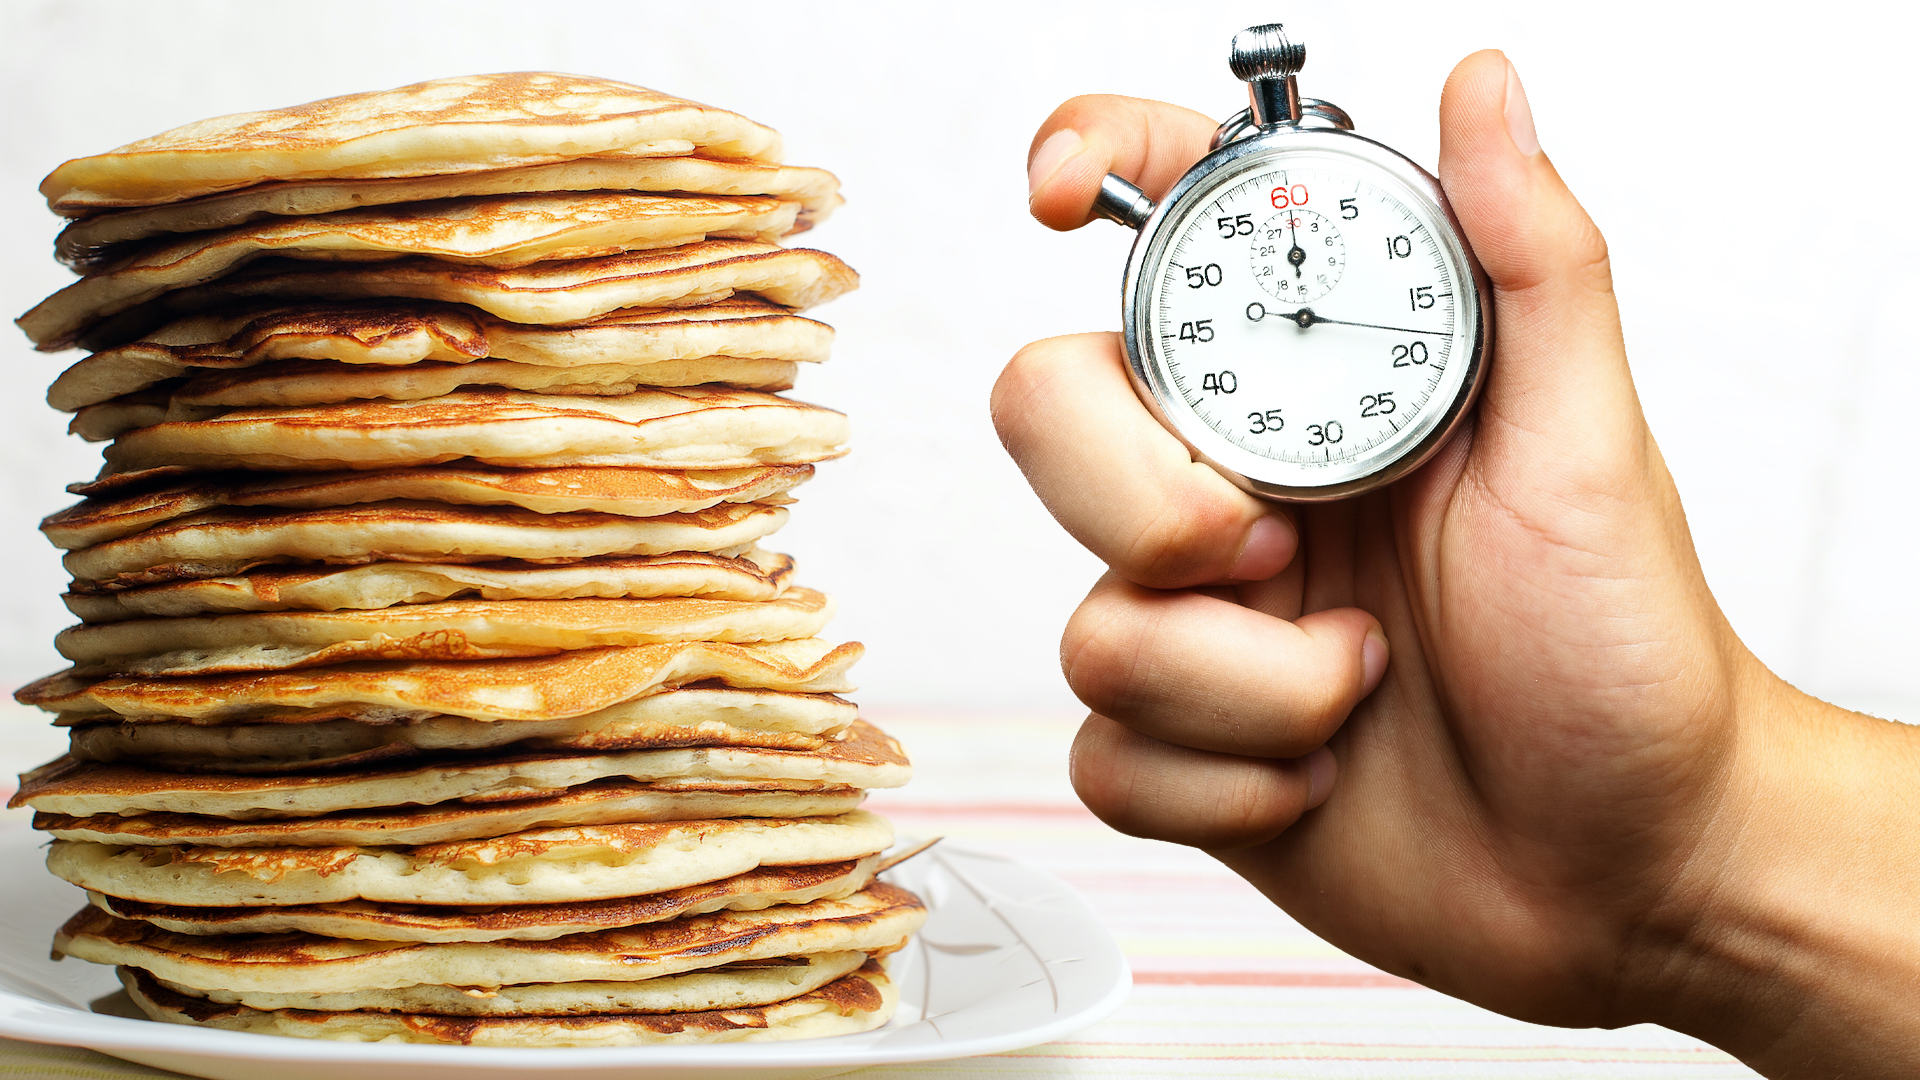 A pancake record with a hand holding a stopwatch